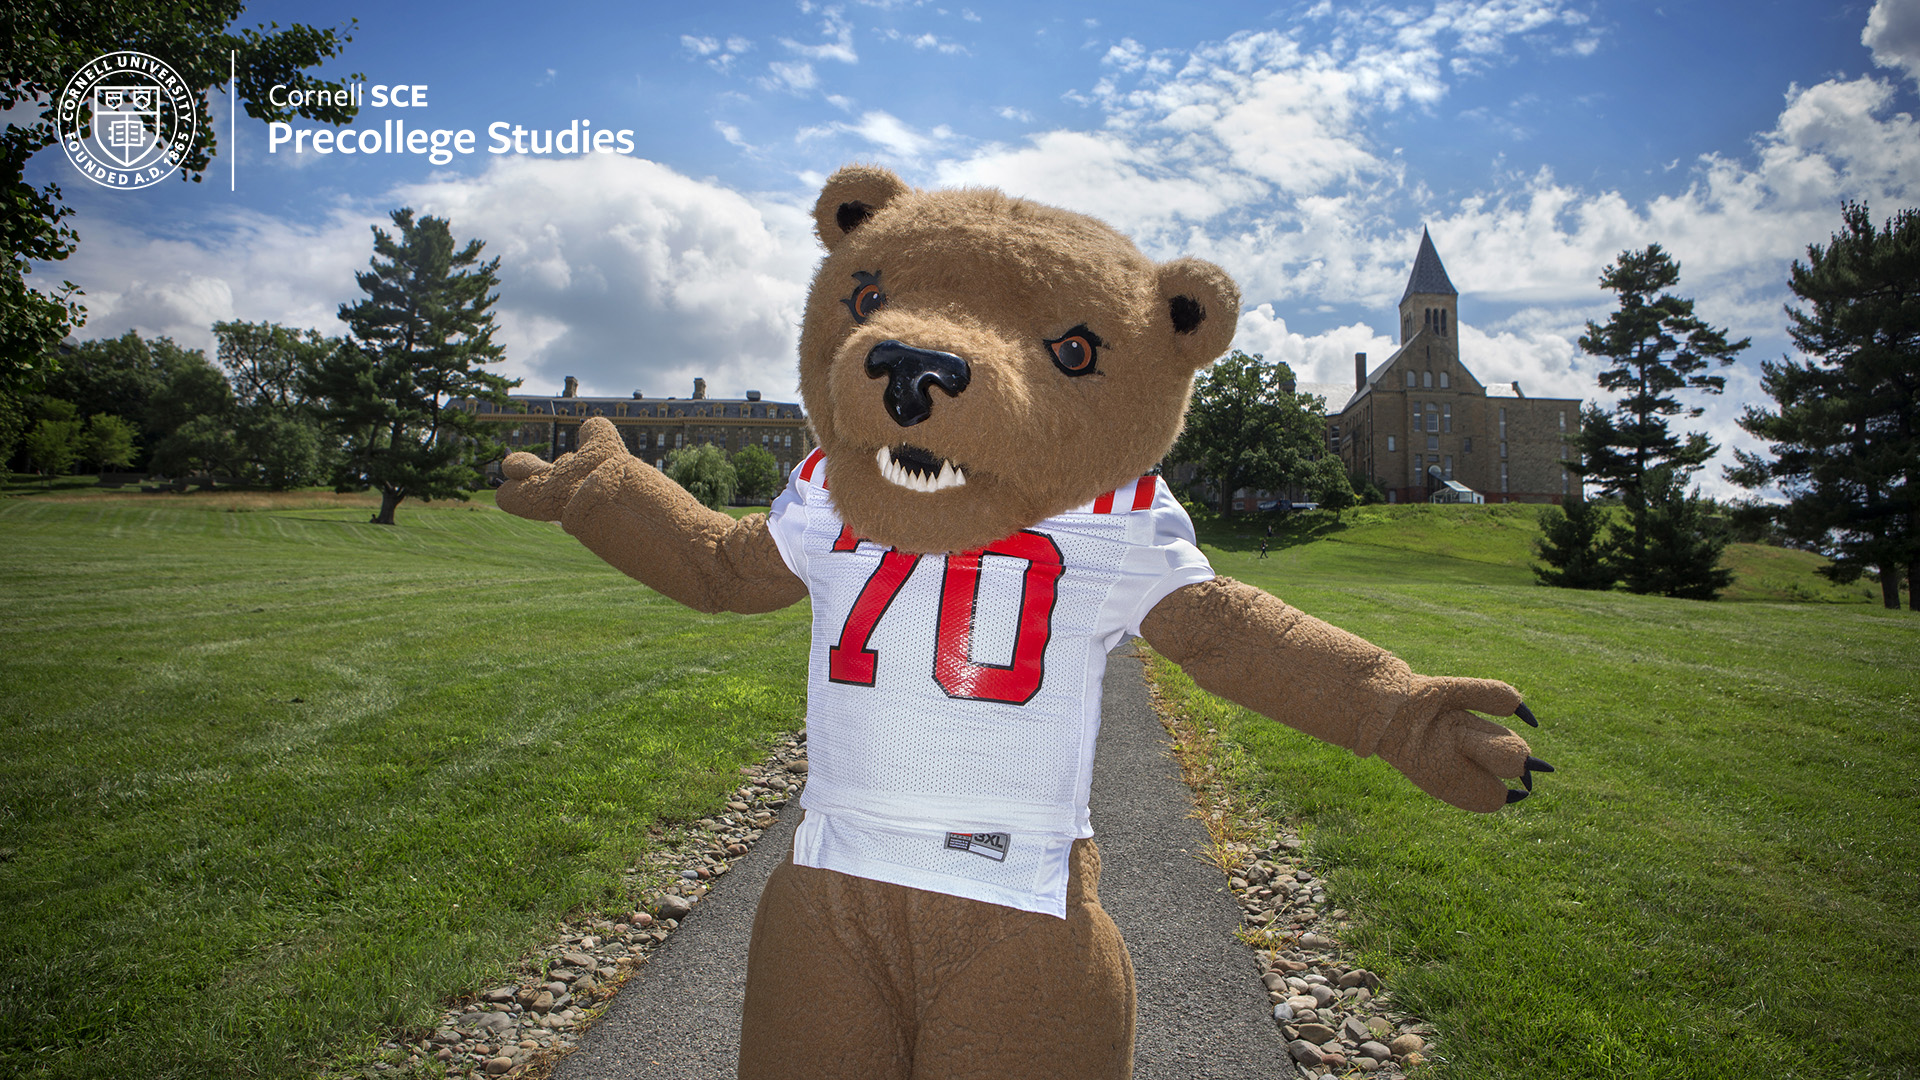 Touchdown, The Big Red Bear